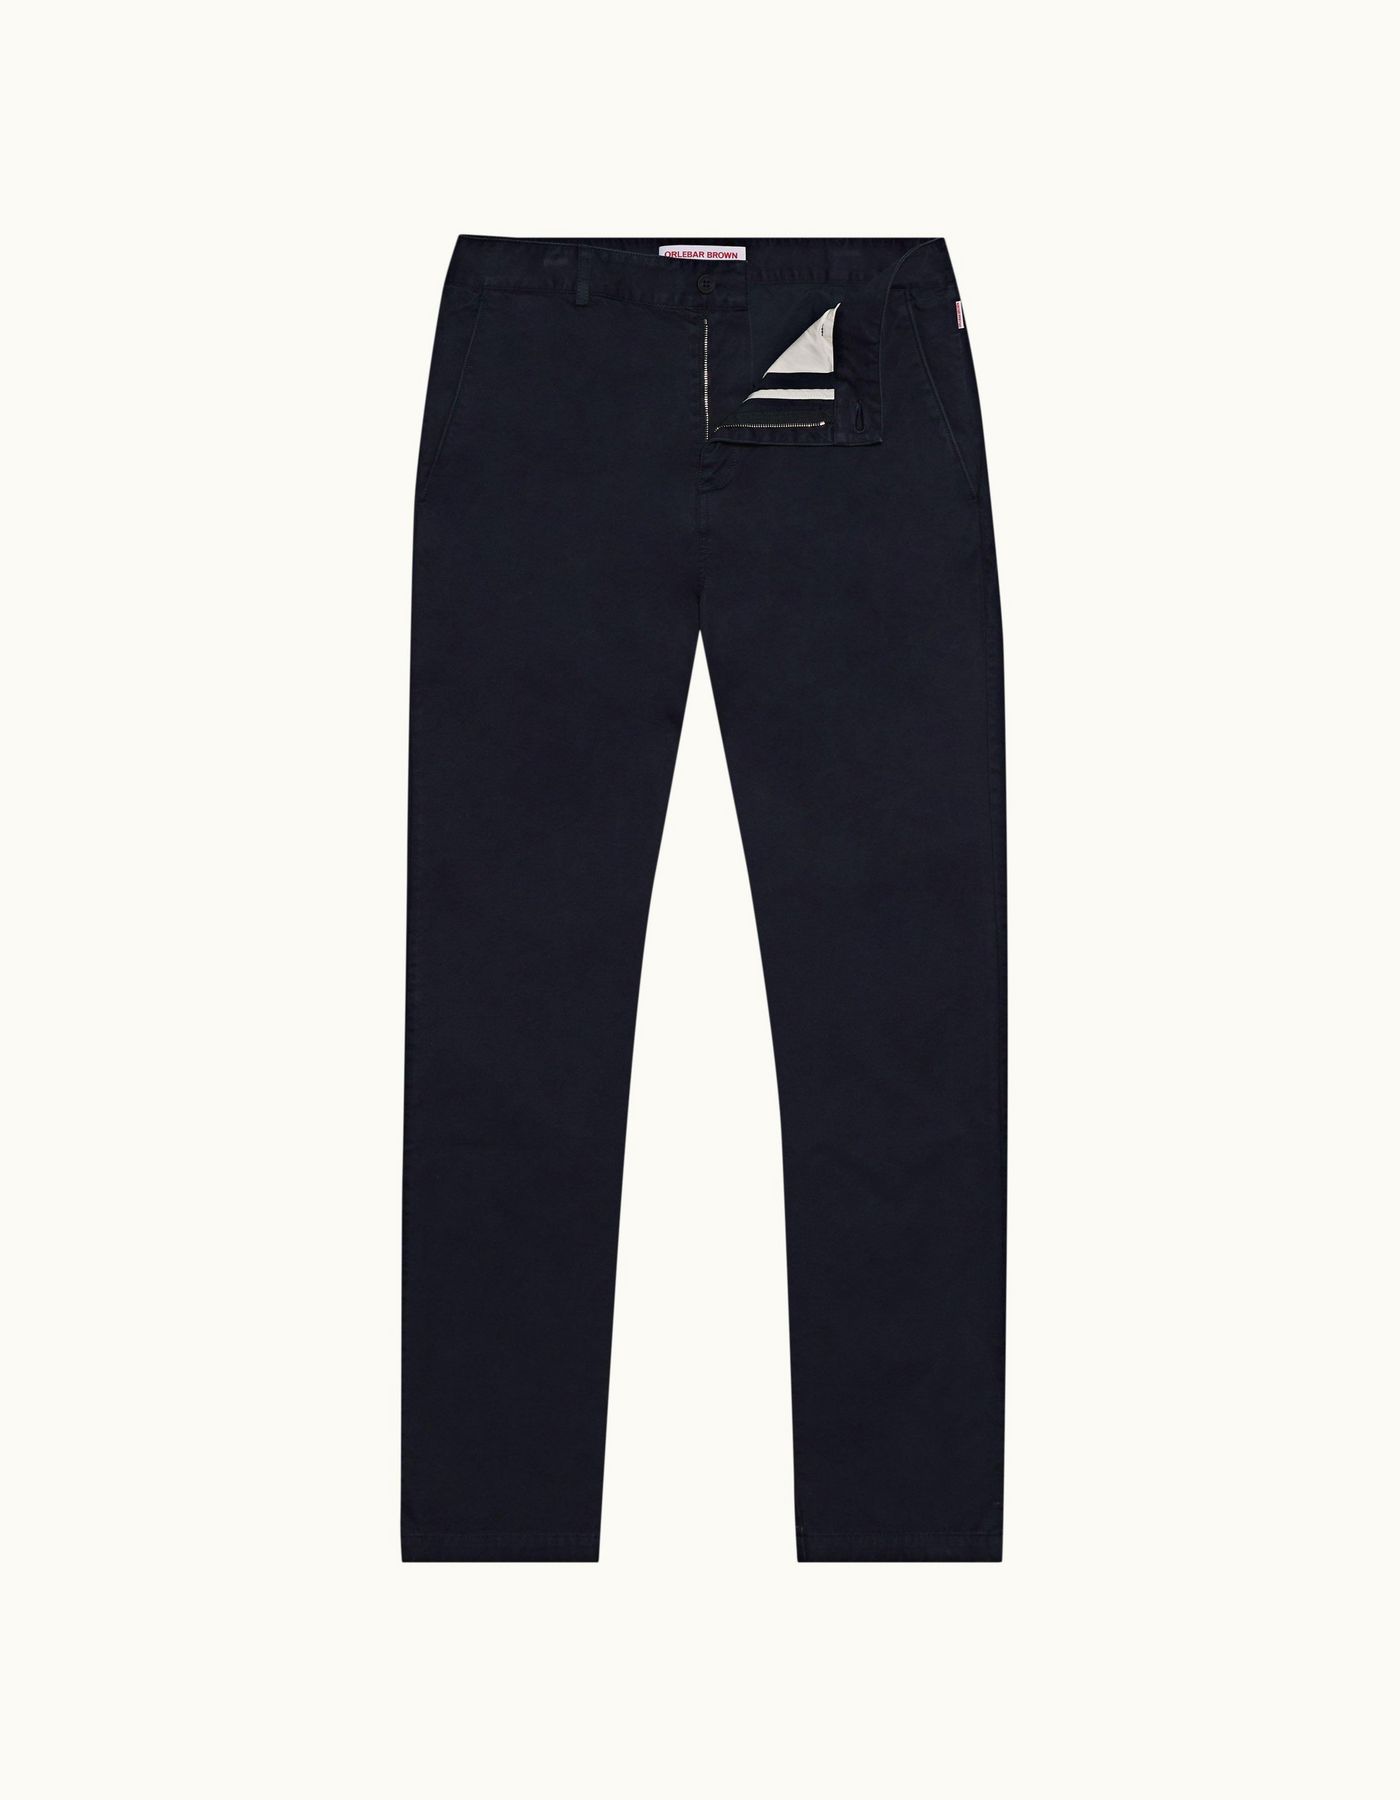 Alexander - Mens Ink Relaxed Fit Cotton Twill Chinos